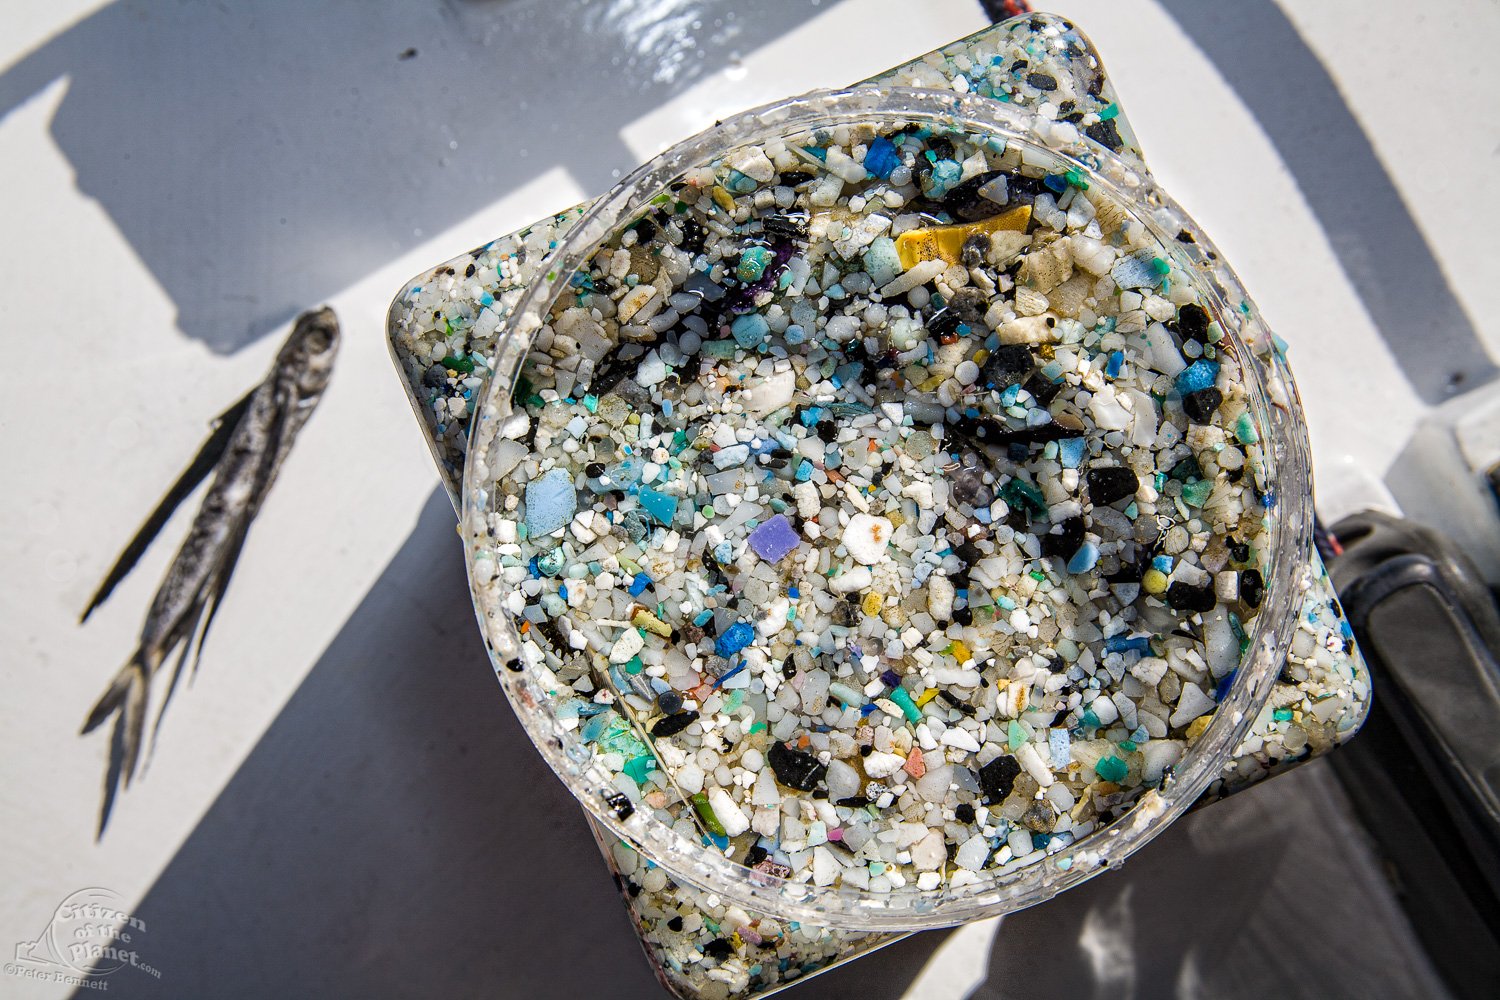  Plastic sample jars of micro-plastics trawled from the North Pacific Gyre, and a Flying Fish. 